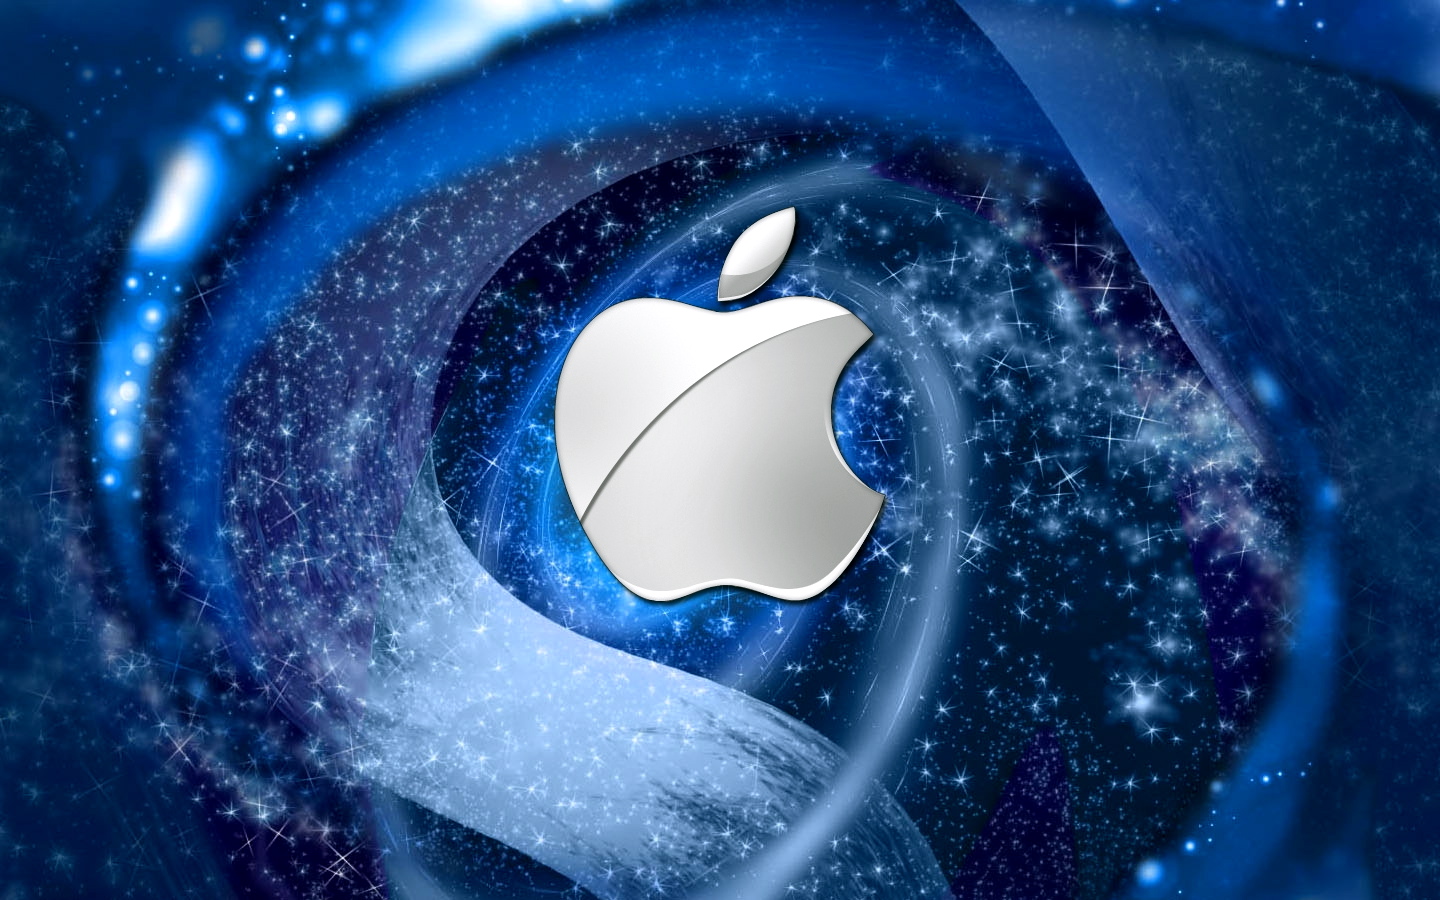 Cool apple logos wallpapers cute Backgrounds